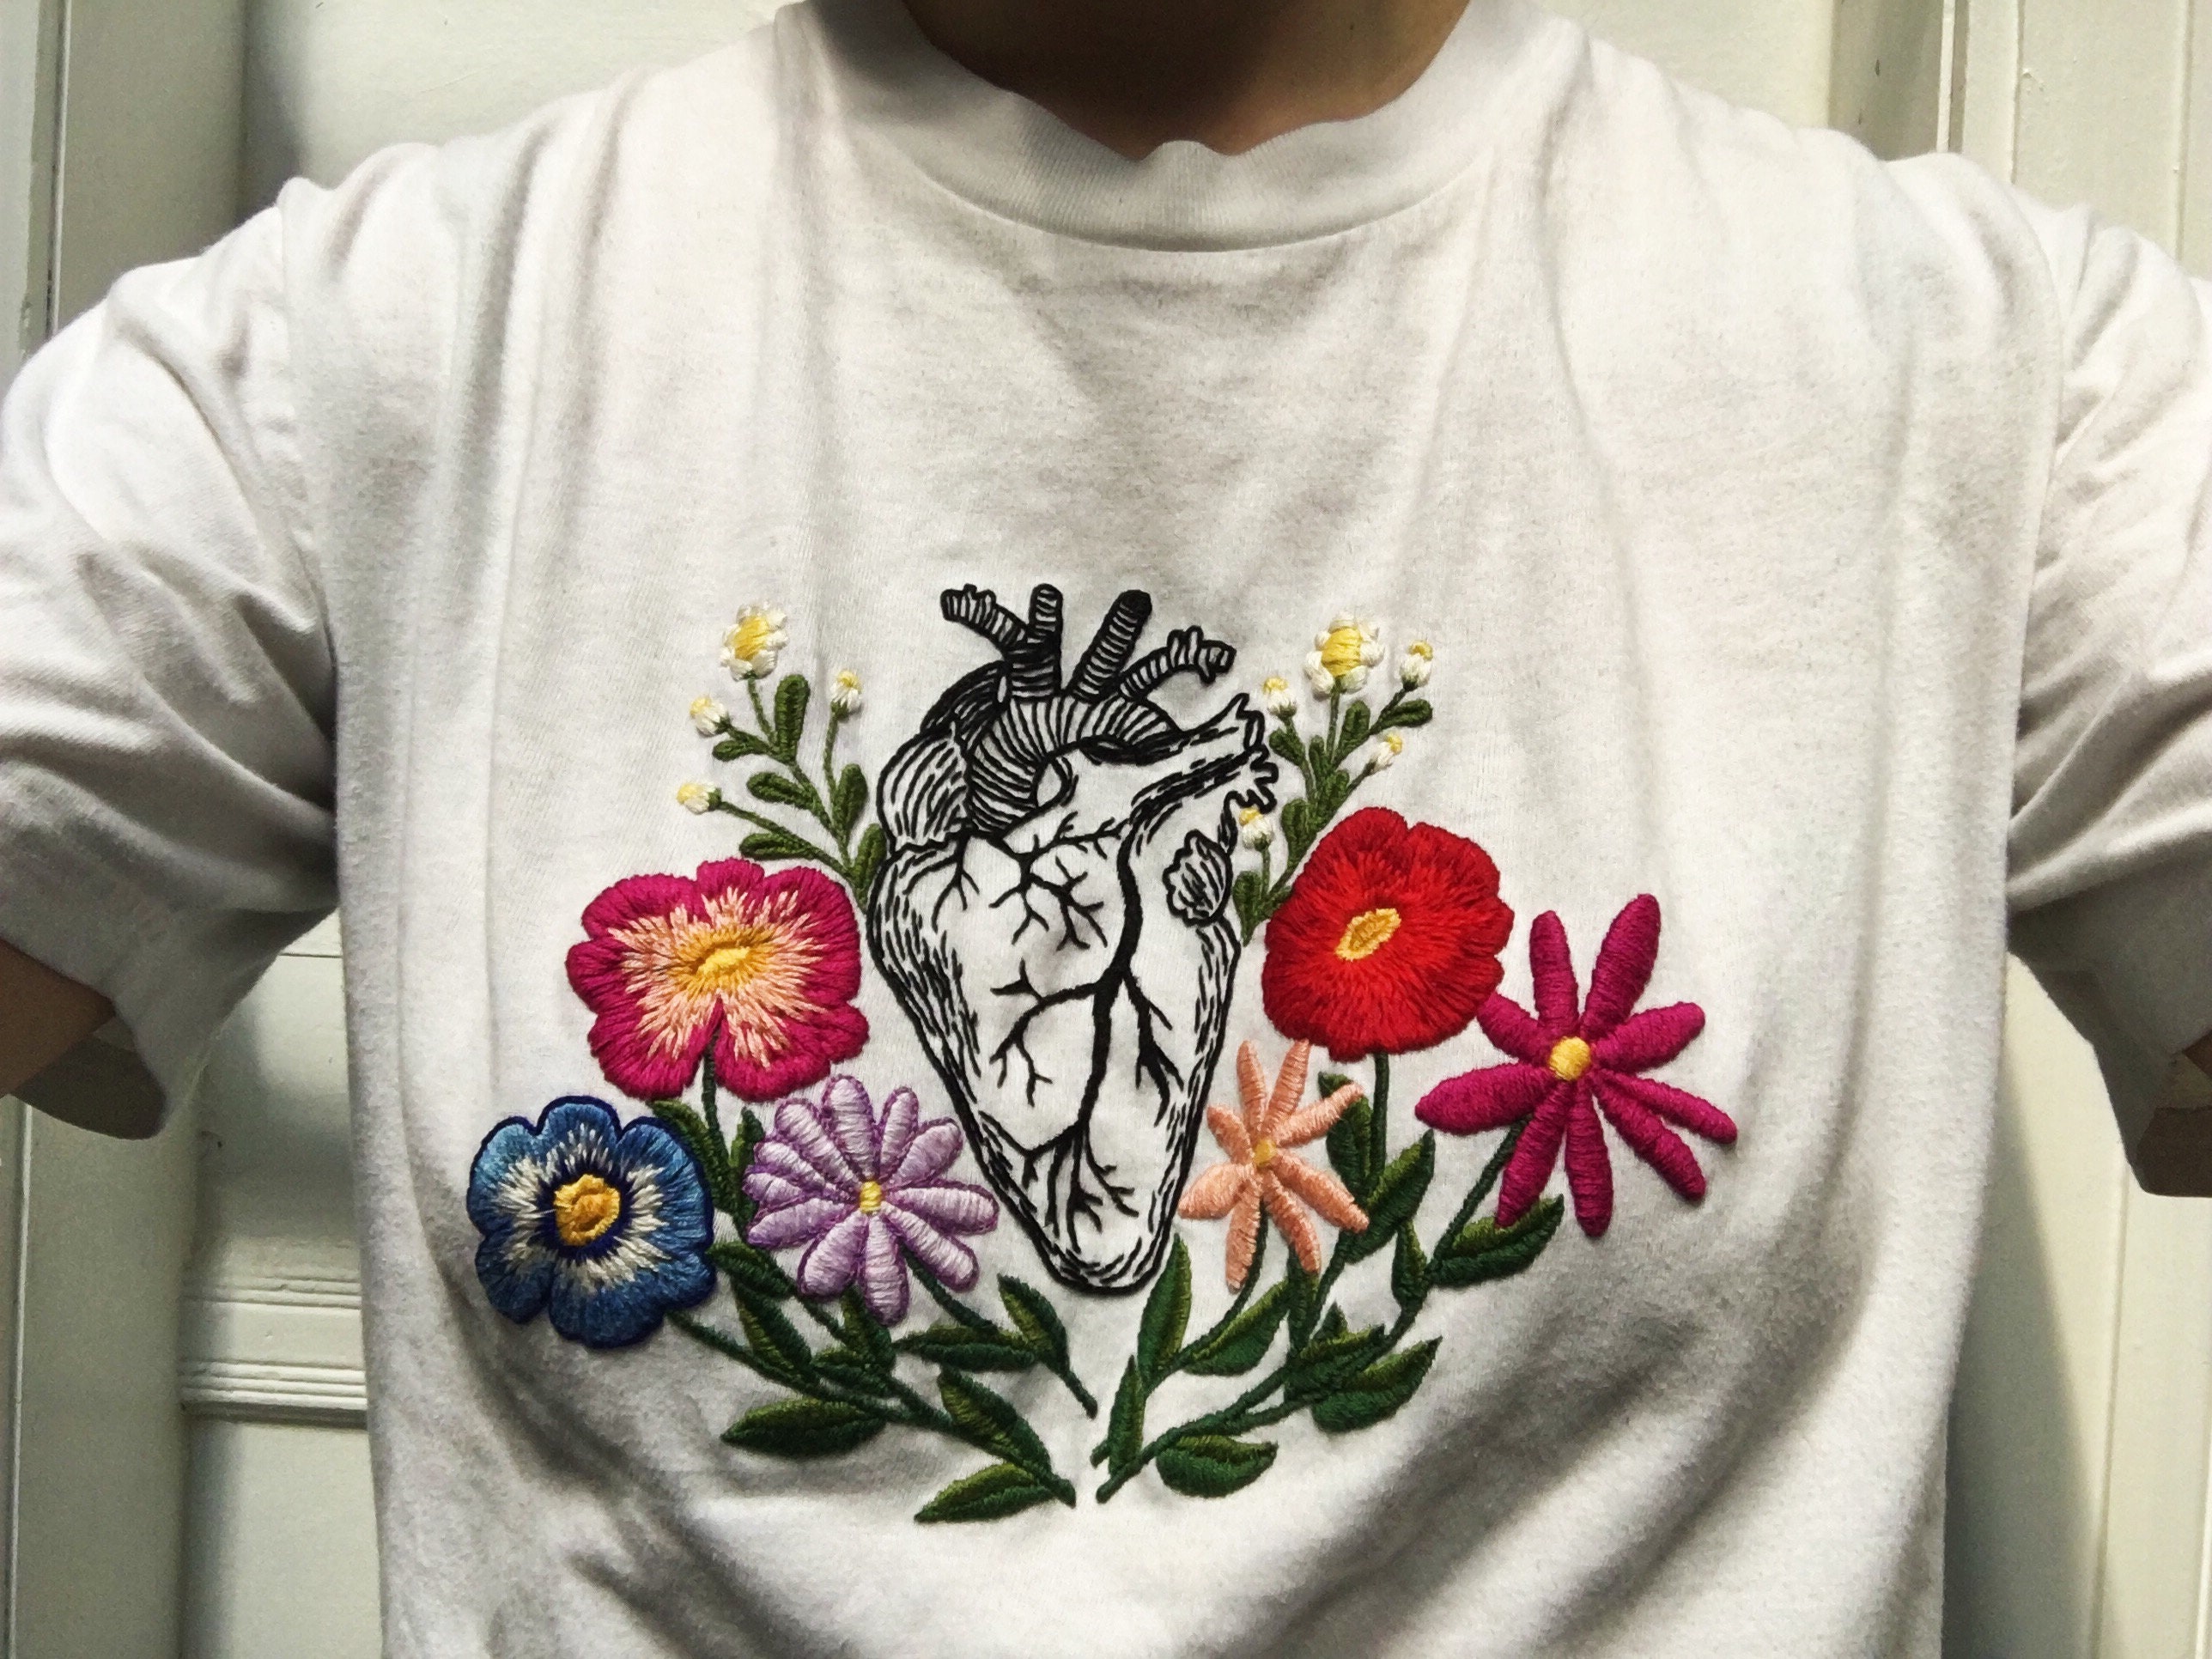 SingeDesigns Anatomical Hand Painted Watercolor Heart T-Shirt